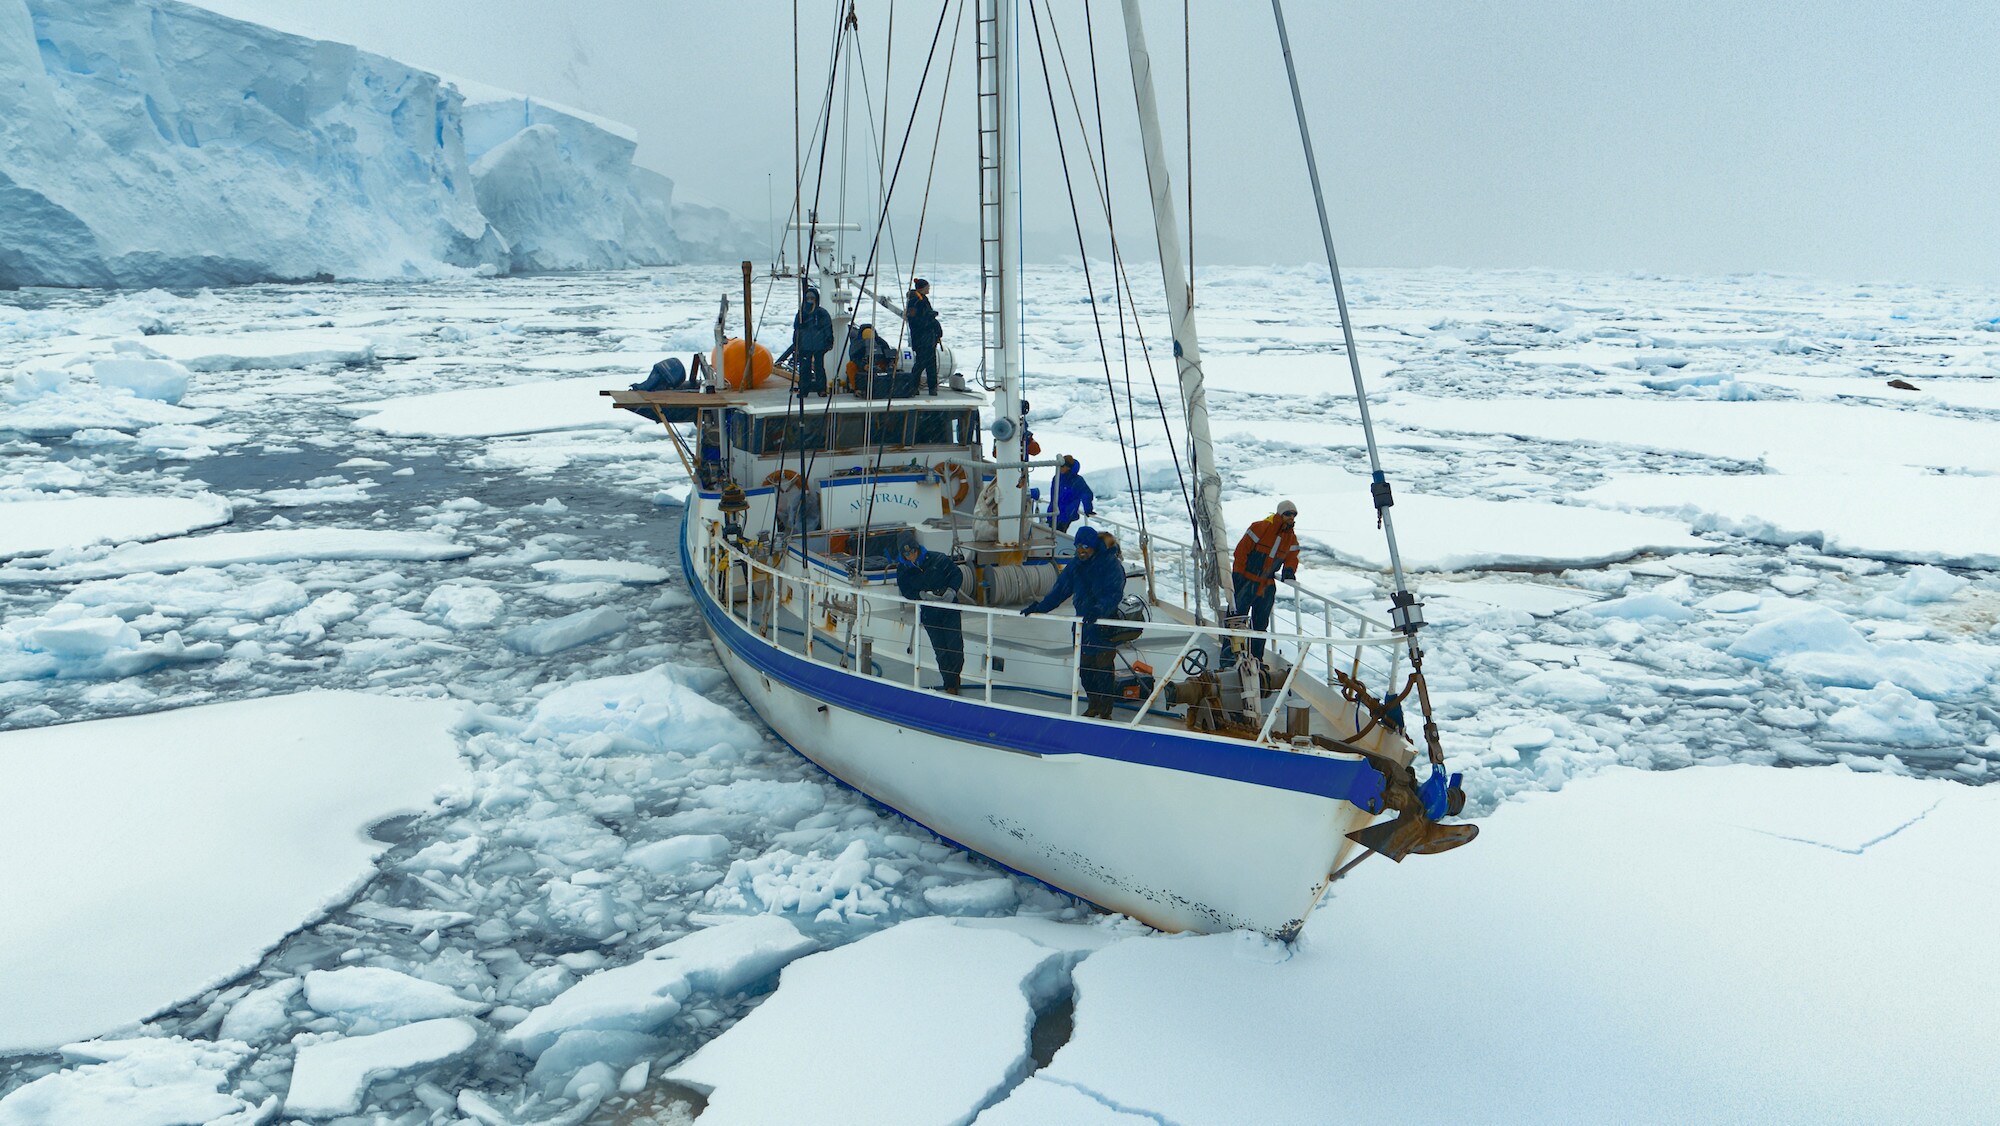 The crew onboard the Australis, heading through the ice sheets. (credit: National Geographic for Disney+/Bertie Gregory)